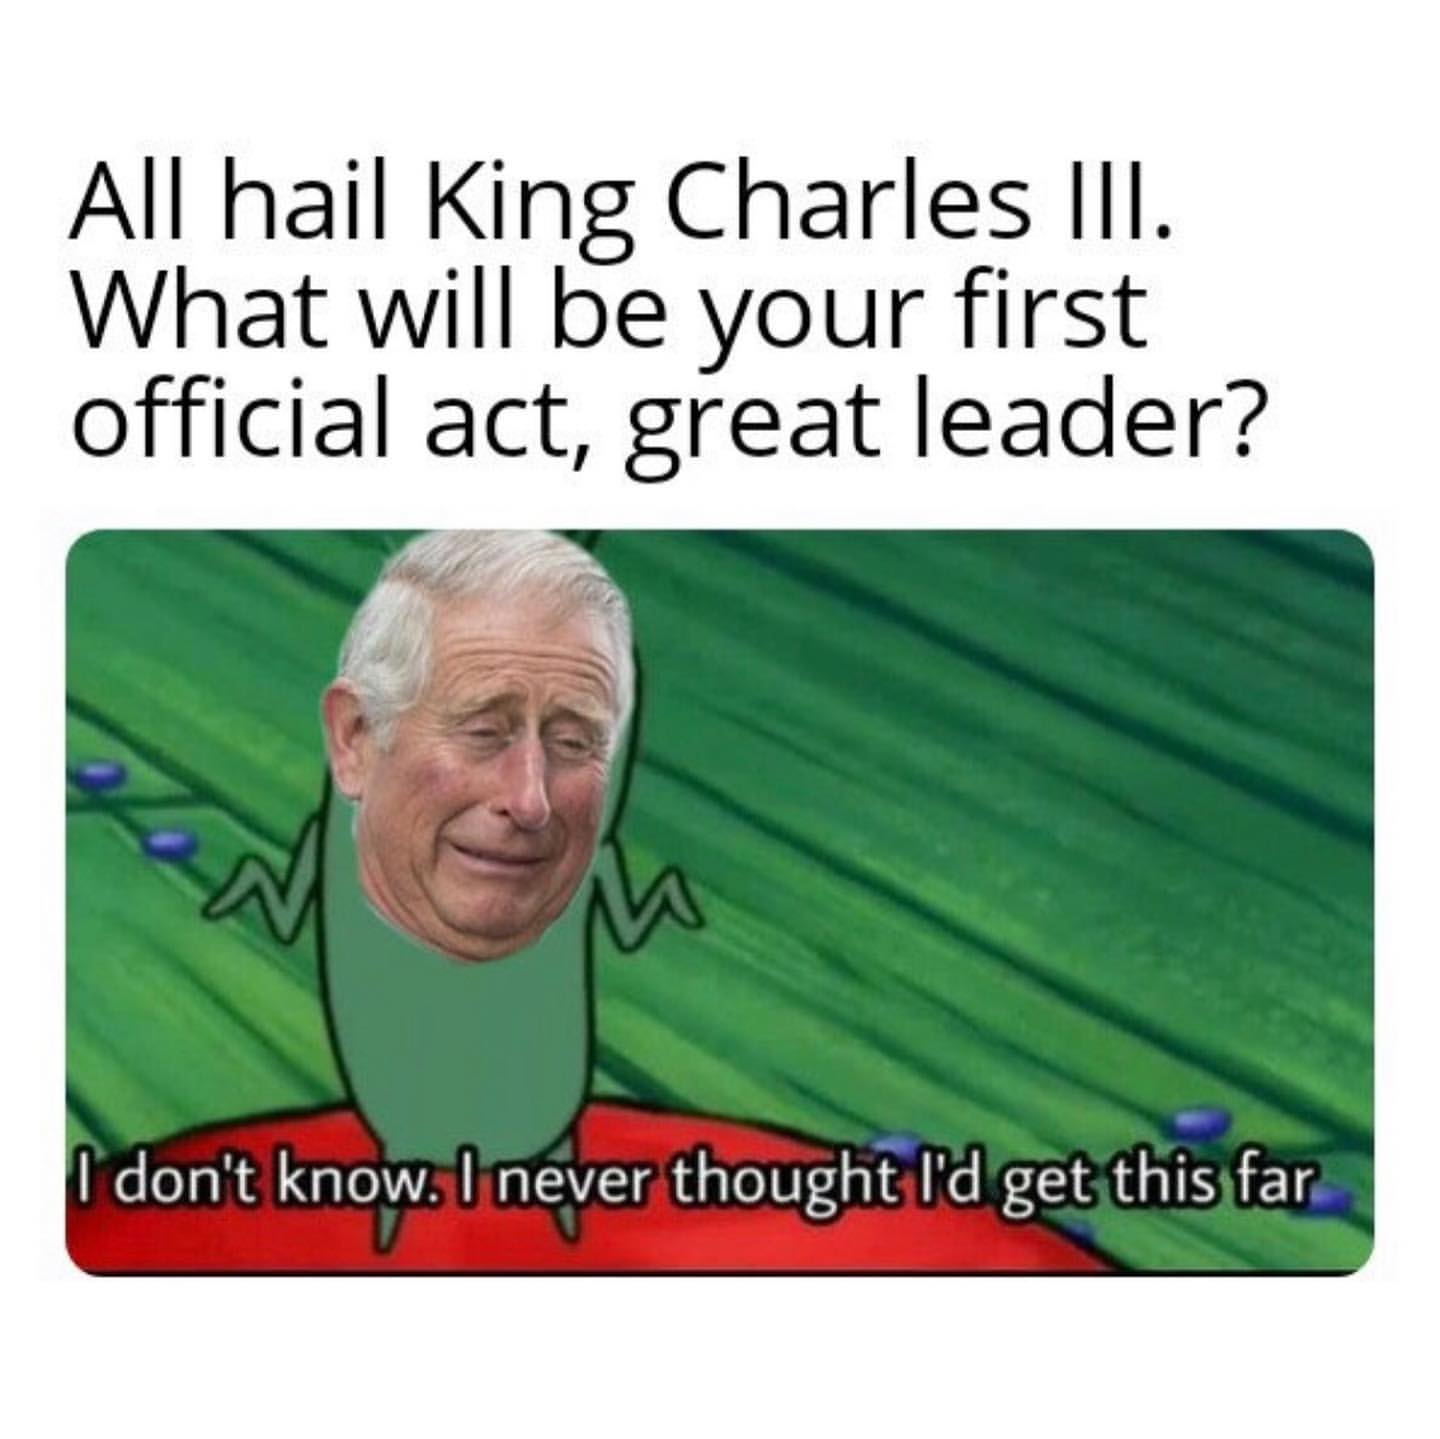 All hail King Charles III. What will be your first official act, great leader?  I don't: know. I never thought I'd get this far.